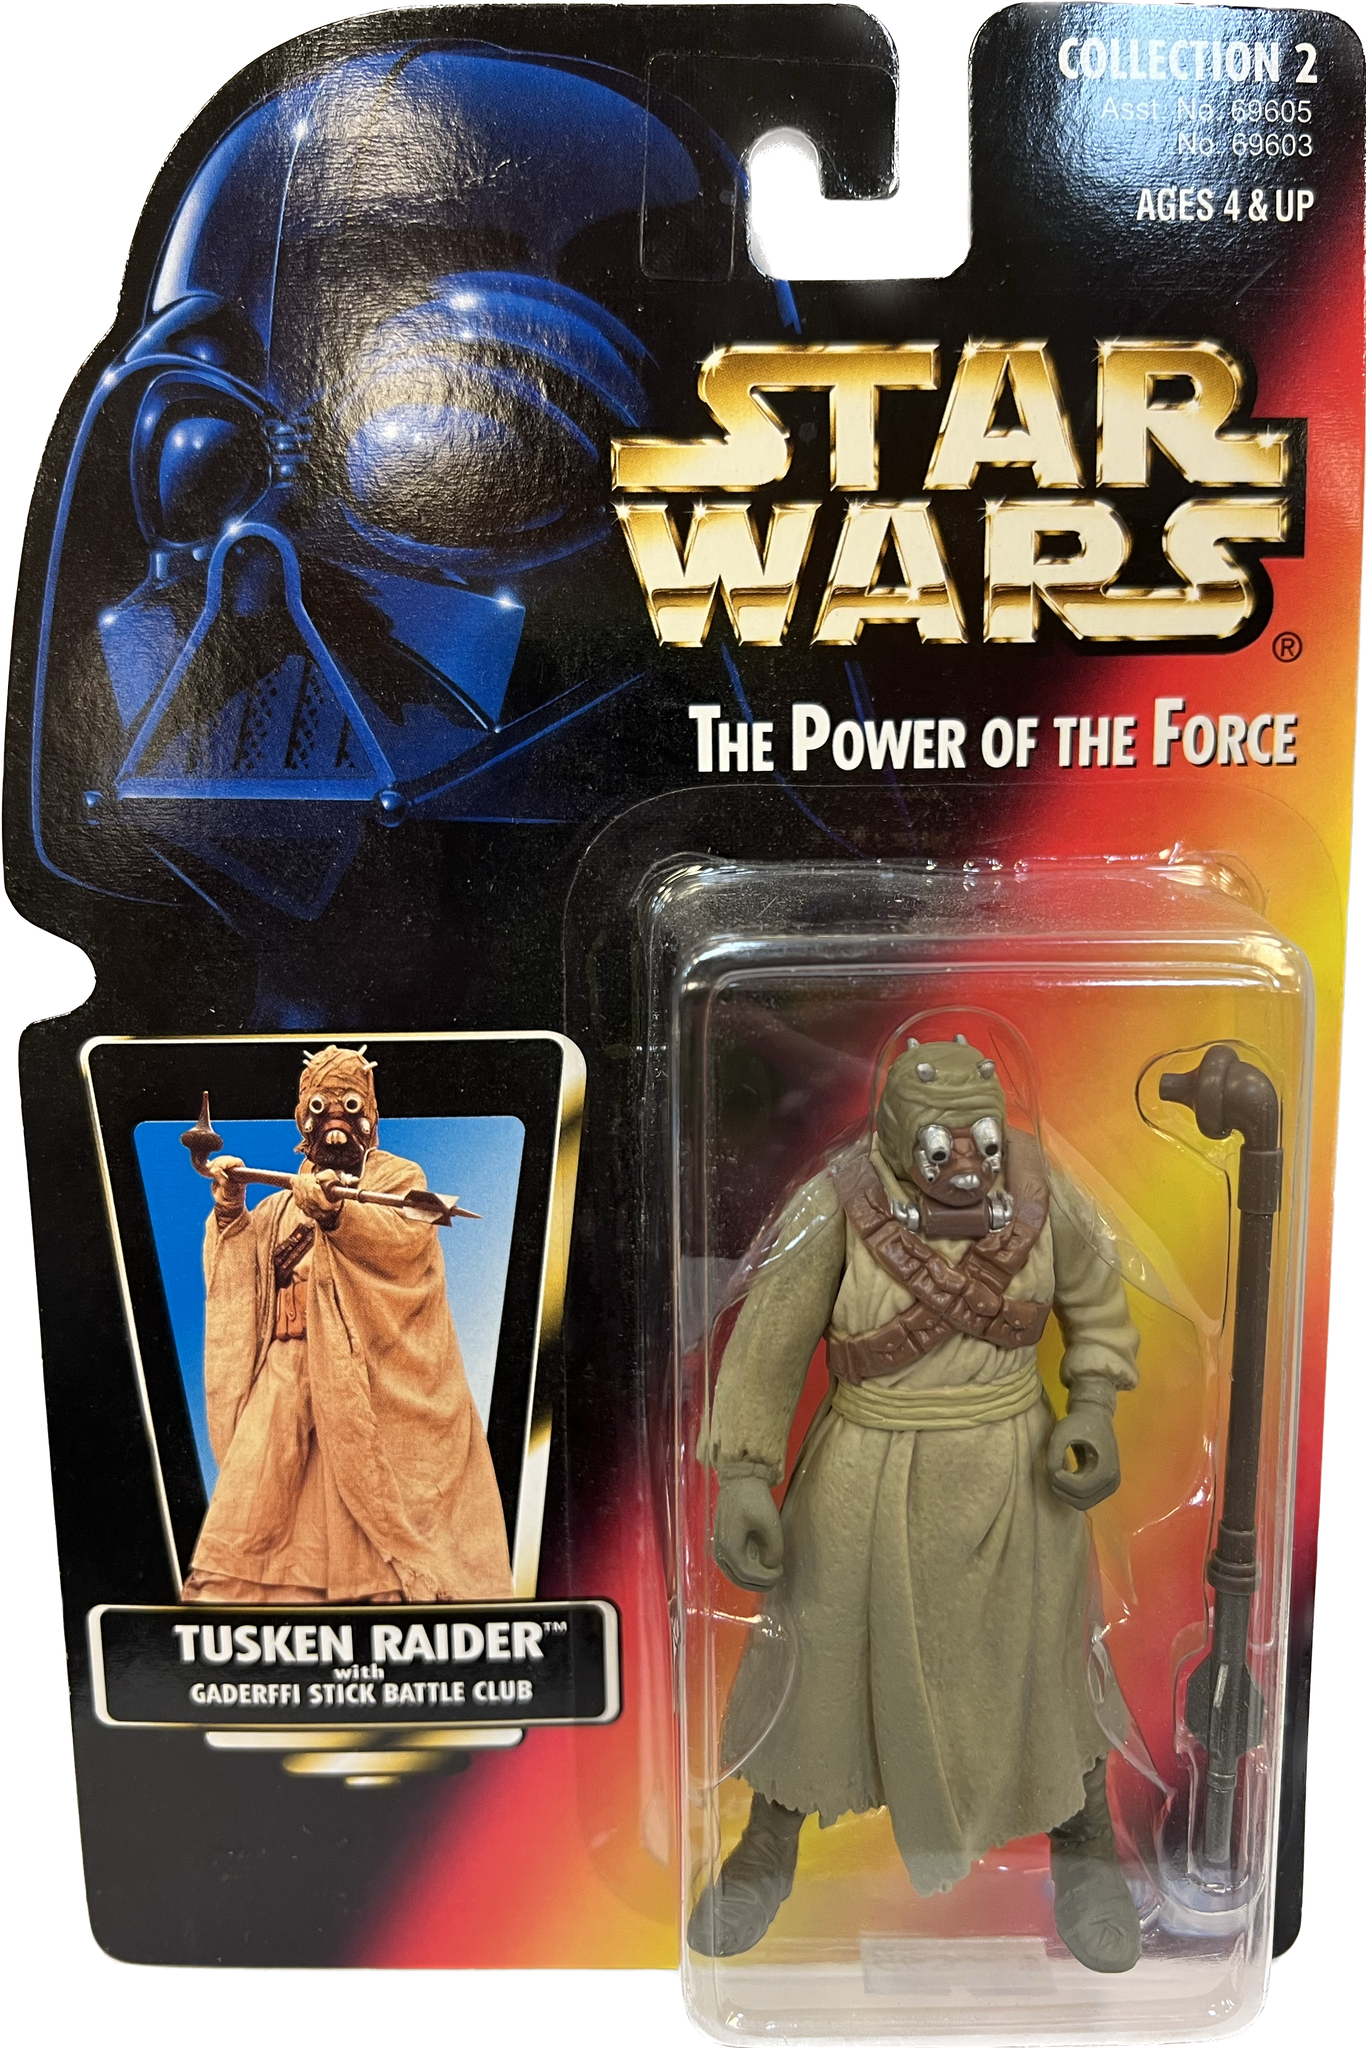 Star Wars Power of the Force Tusken Raider